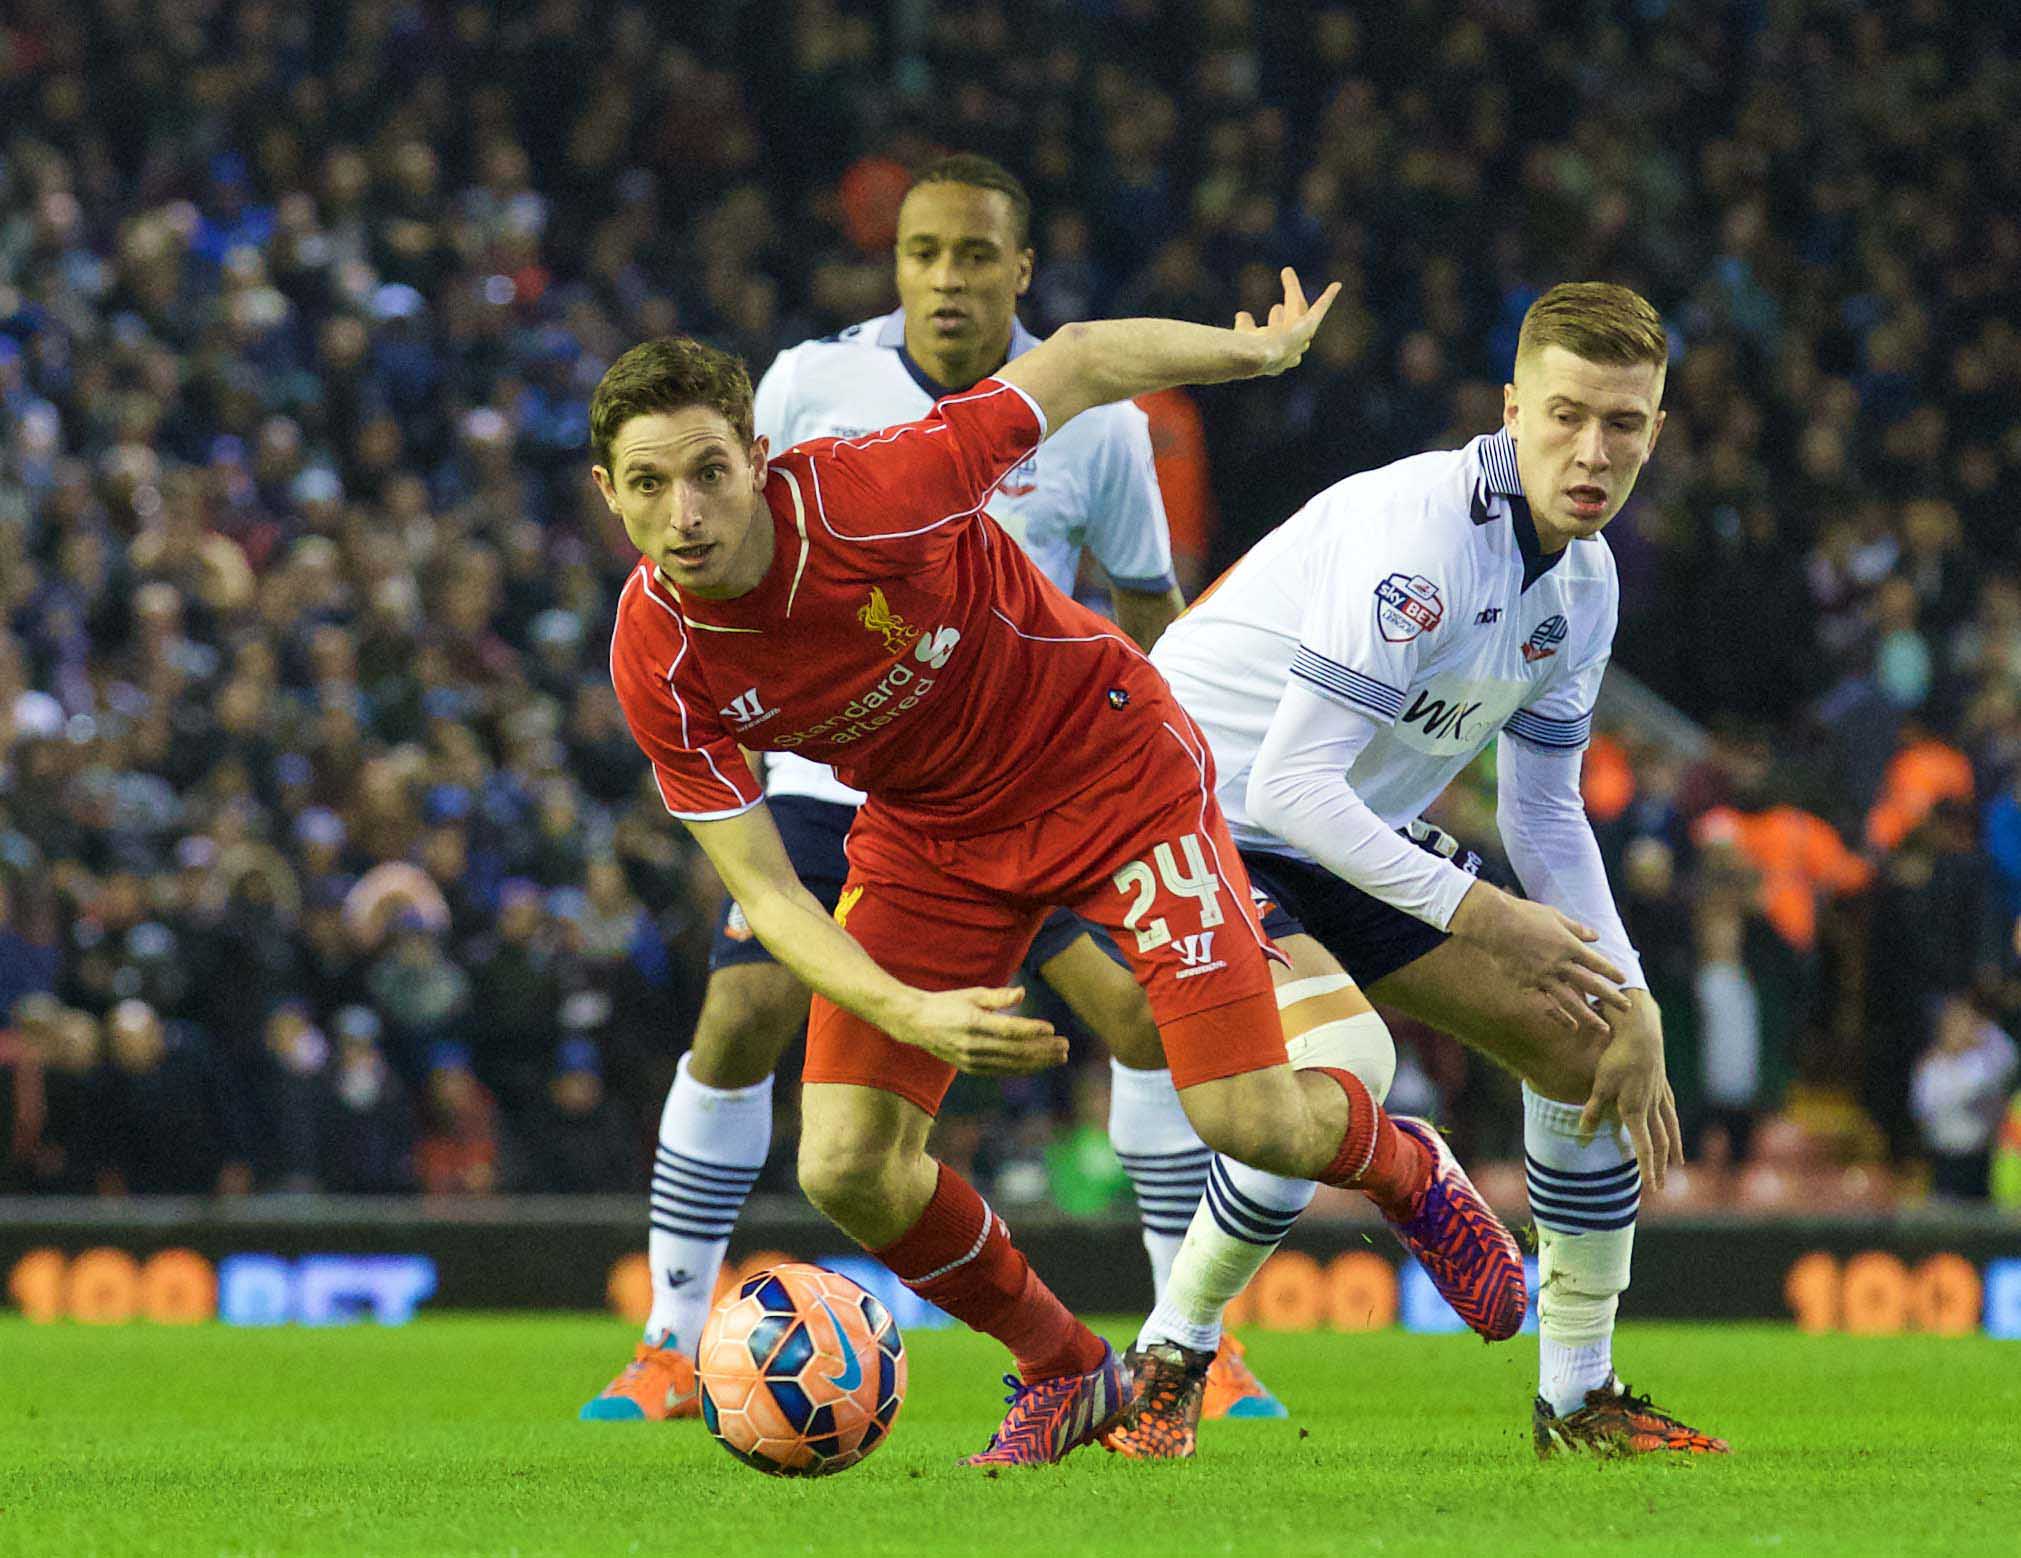 Football - FA Cup - 4th Round - Liverpool FC v Bolton Wanderers FC